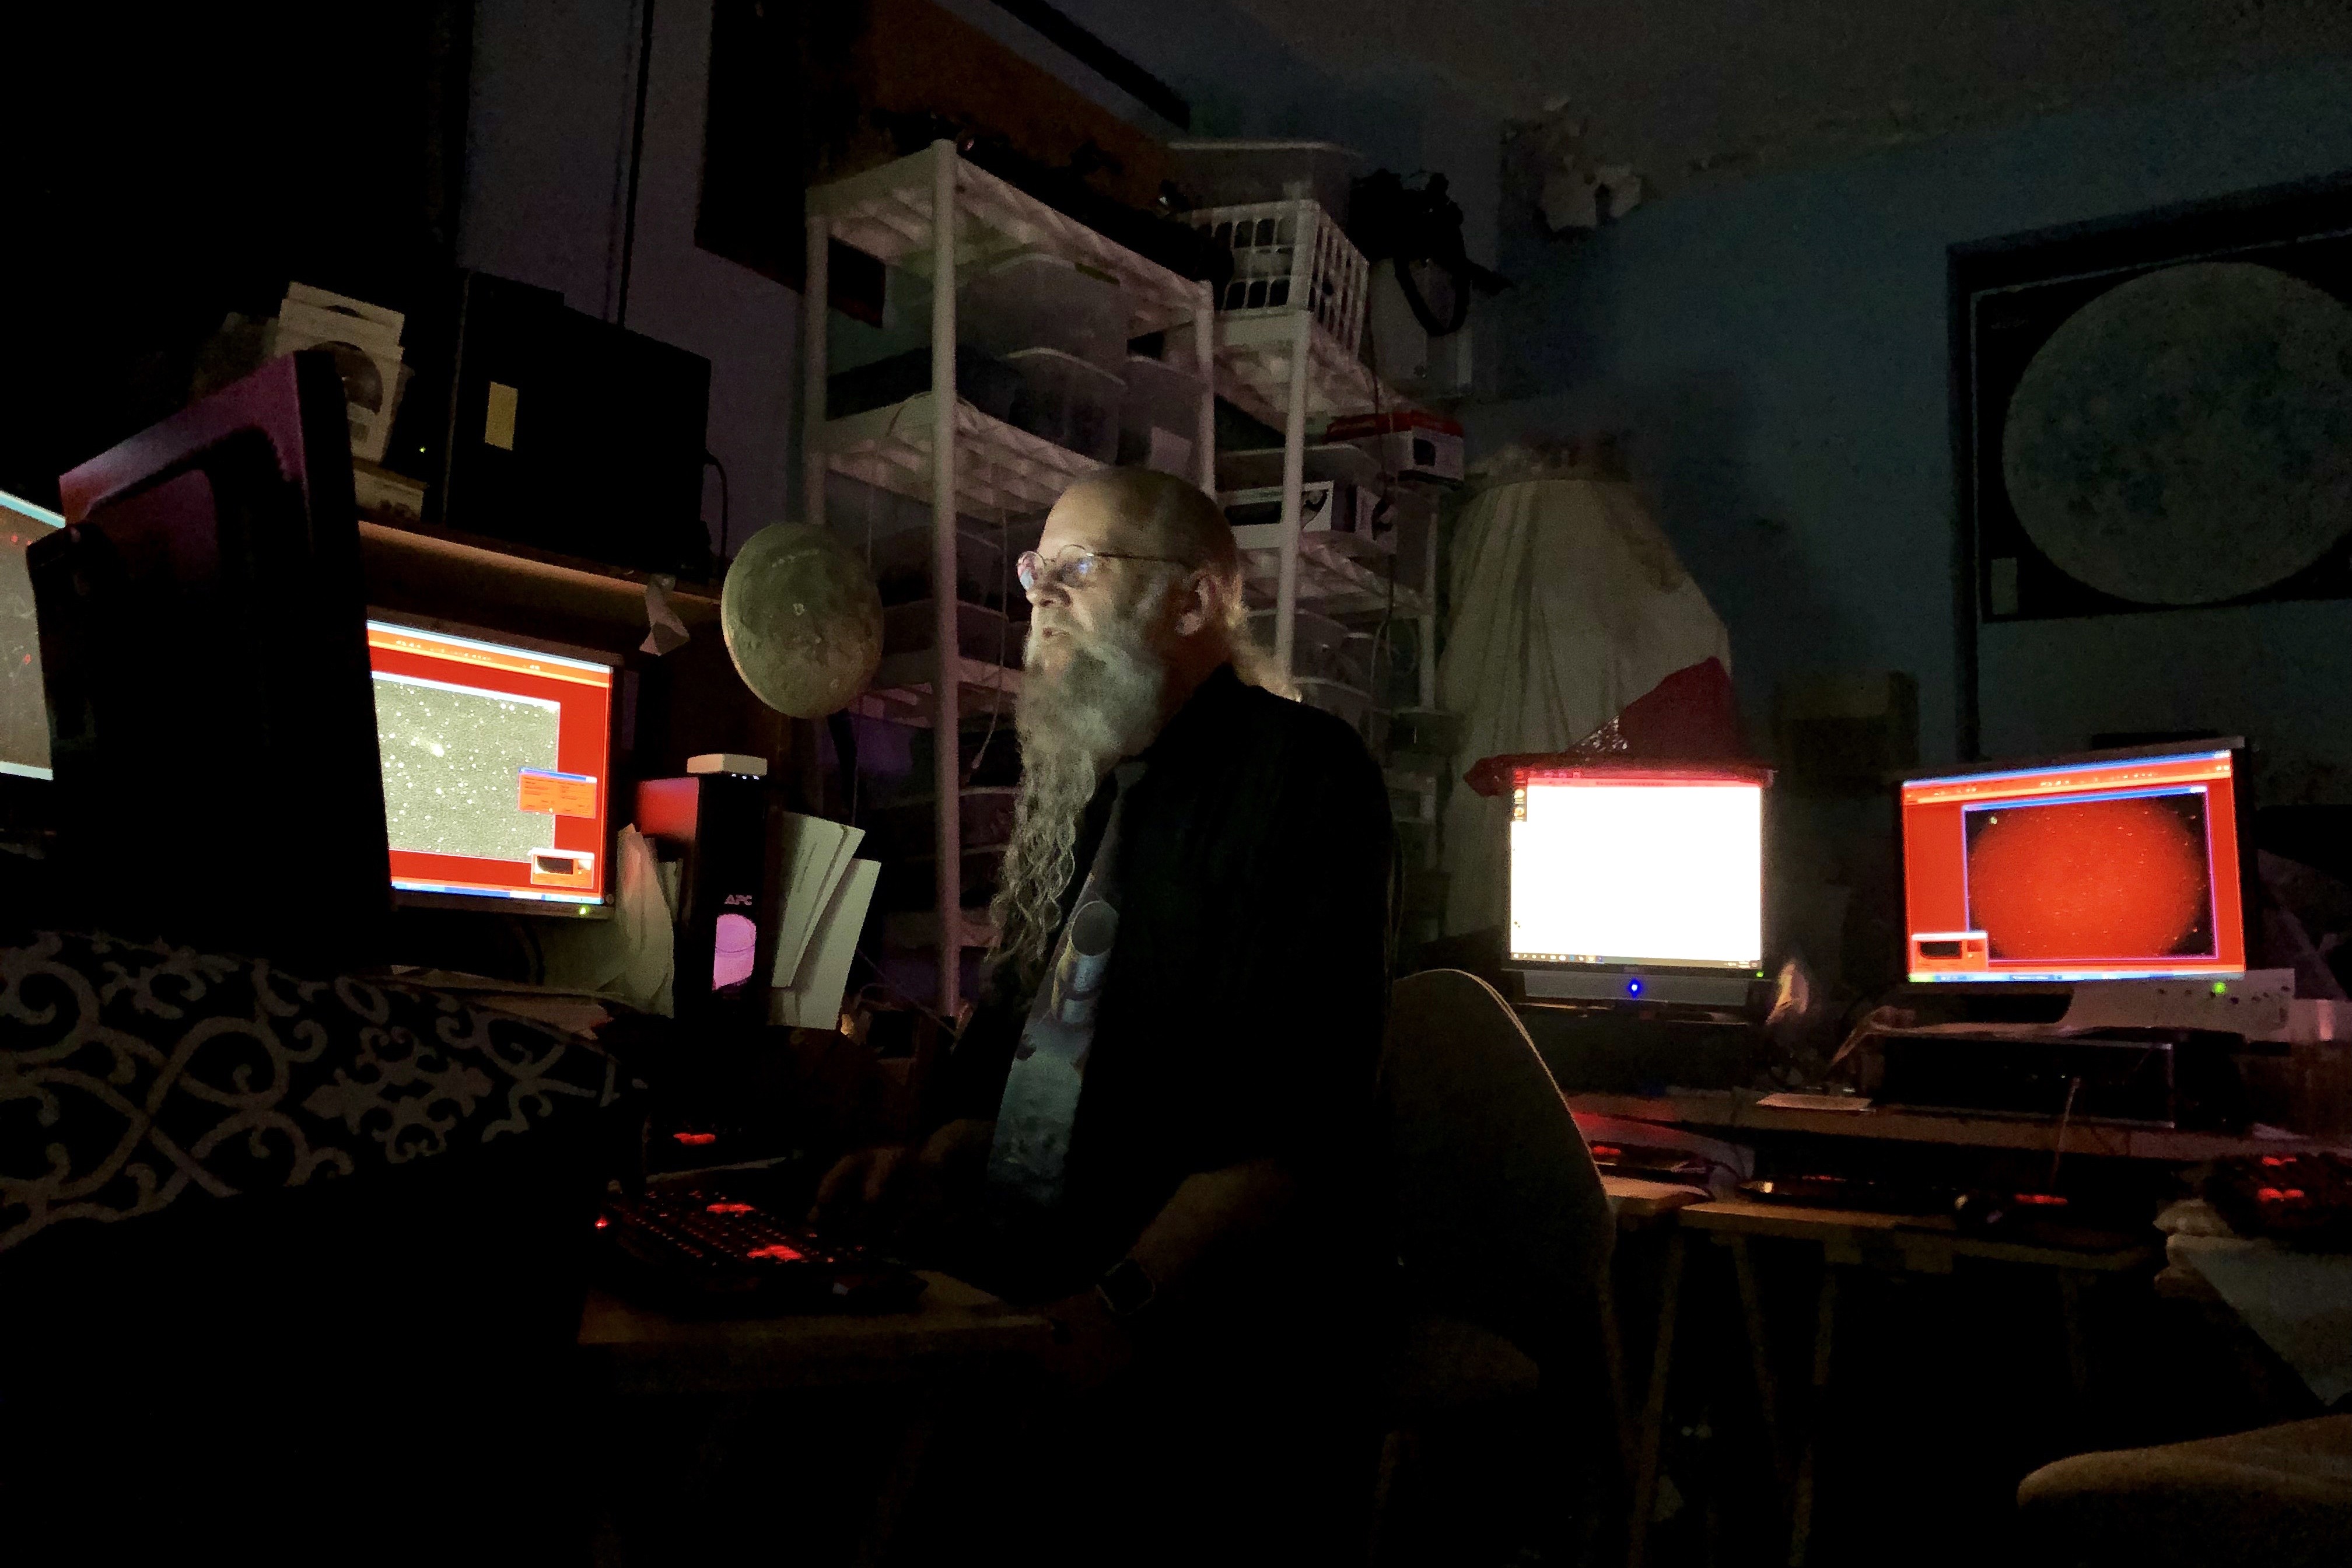 Astronomer Doug Durig waits in darkness for images of the comet object 2I/Borisov, on October 3, in Sewanee, Tennesse, in the United States. Photo: Washington Post / Sarah Kaplan